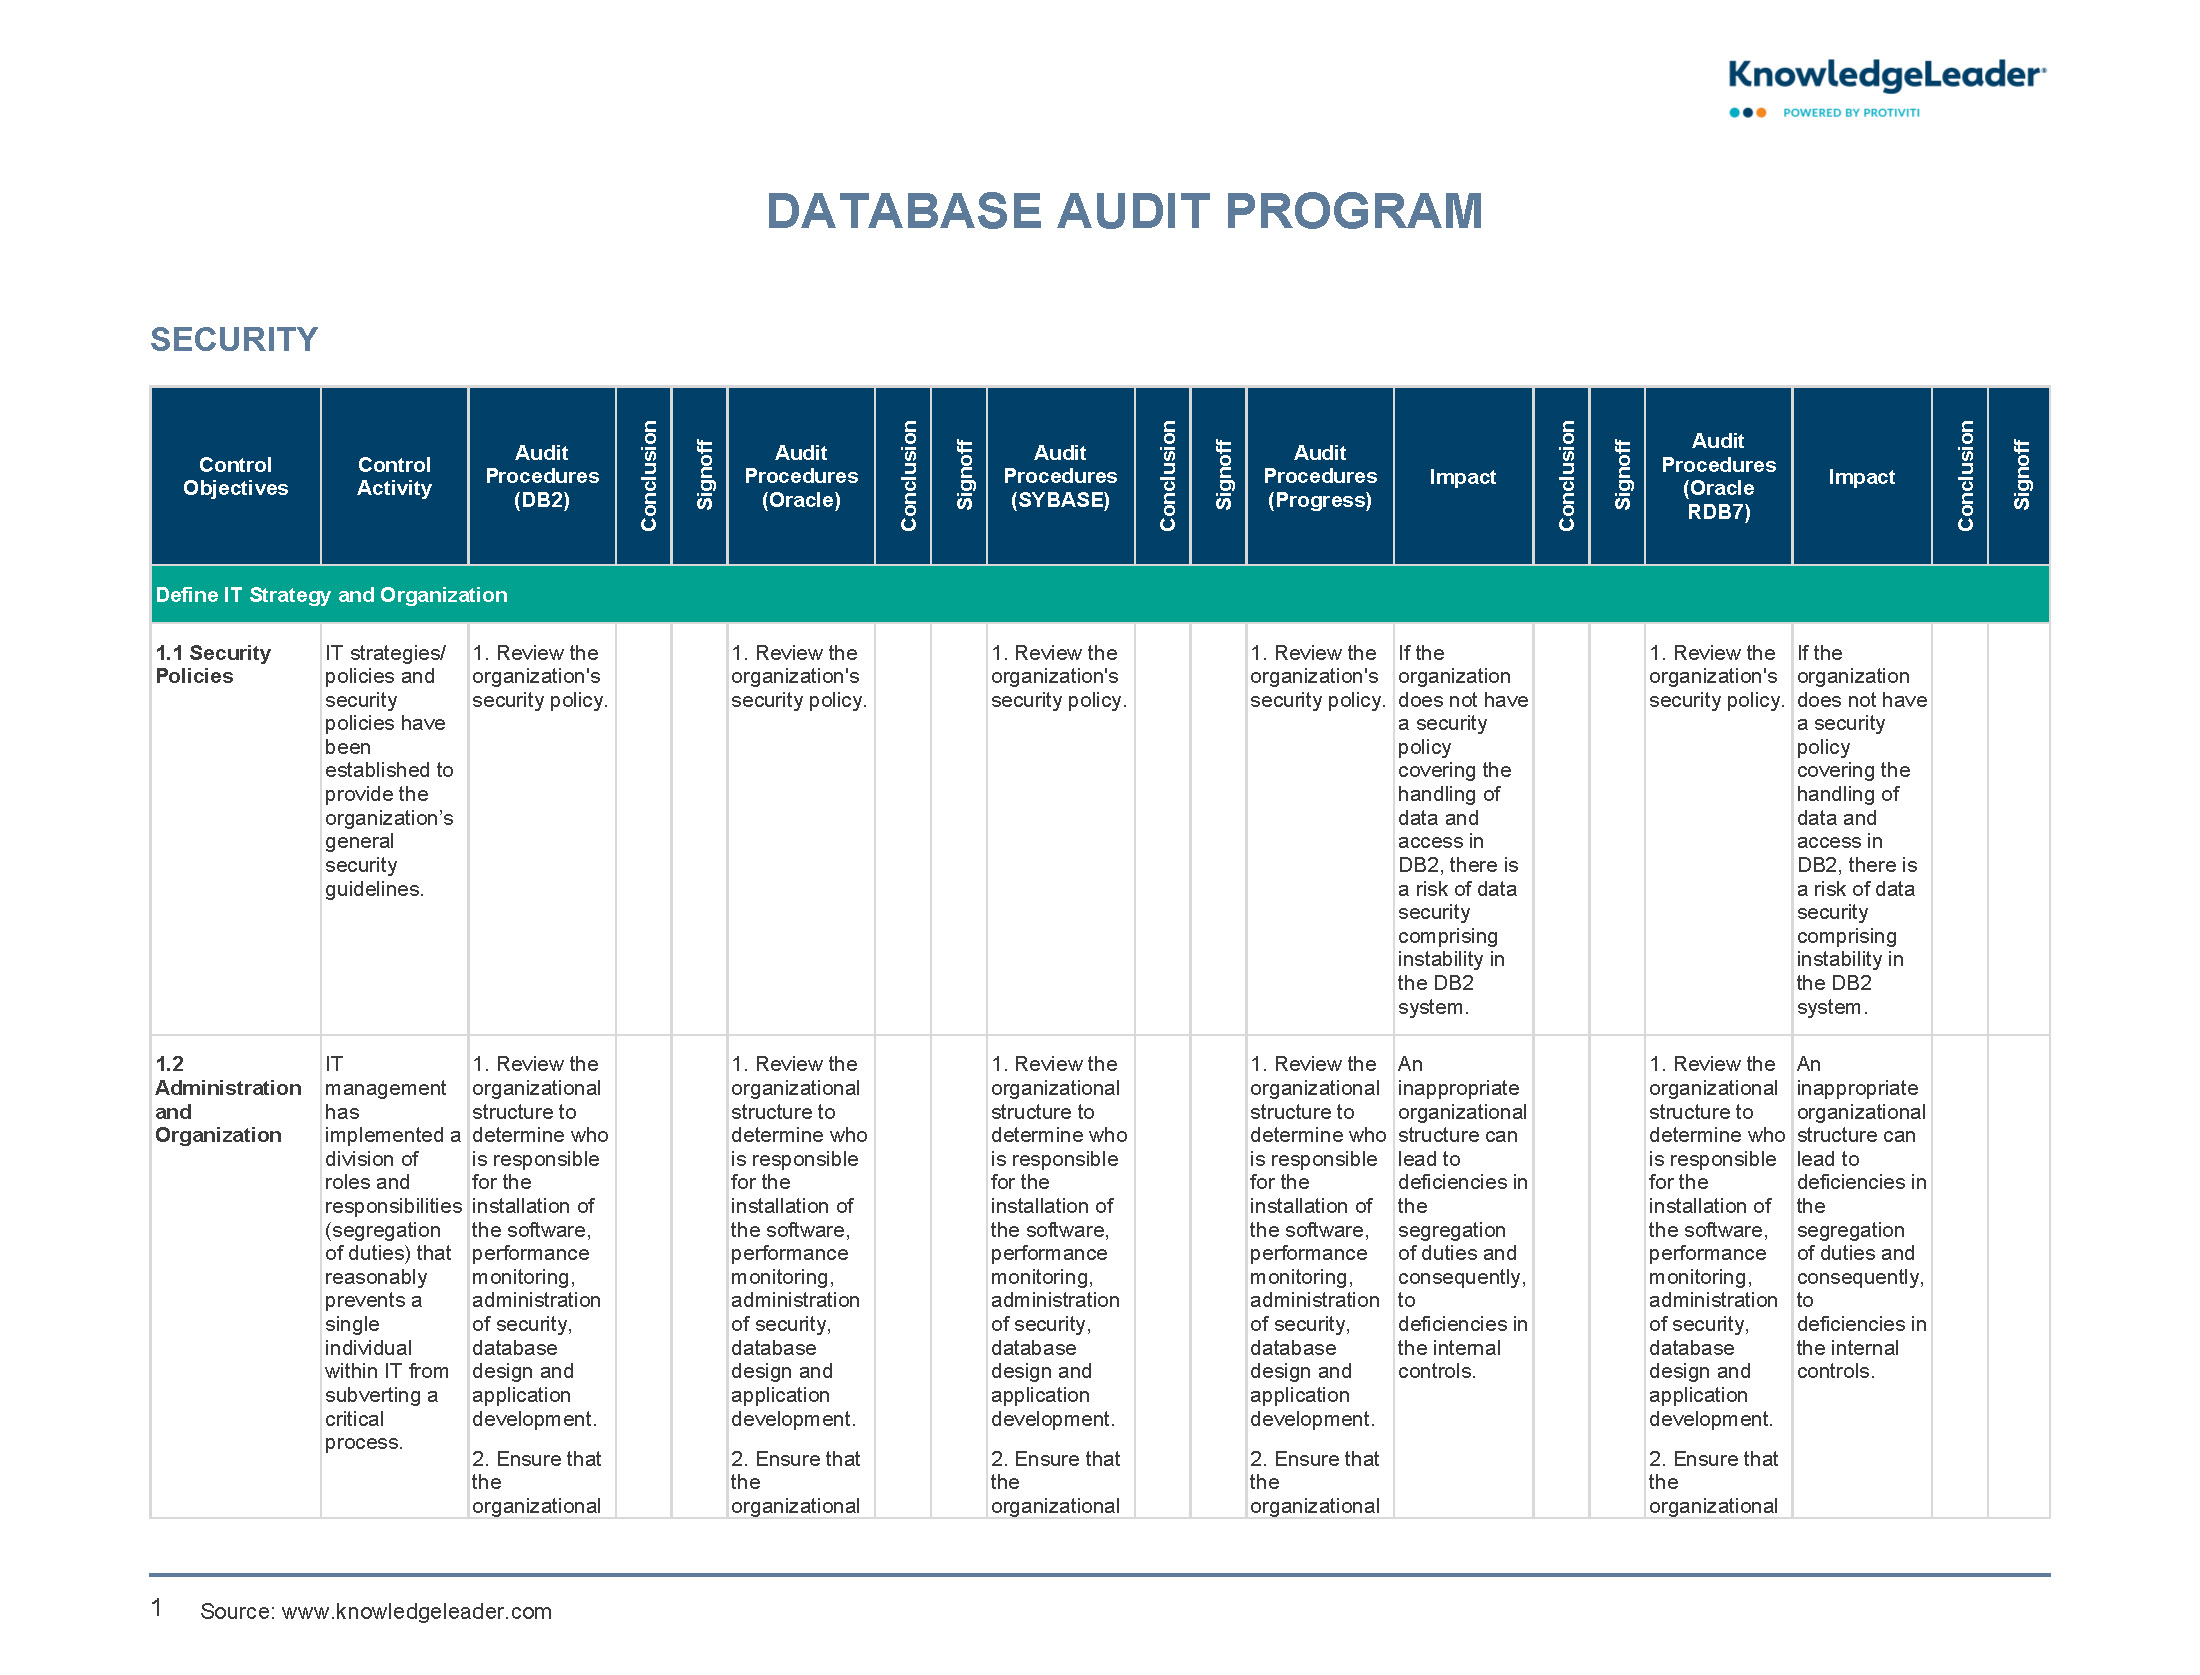 Screenshot of the first page of Database Audit Program